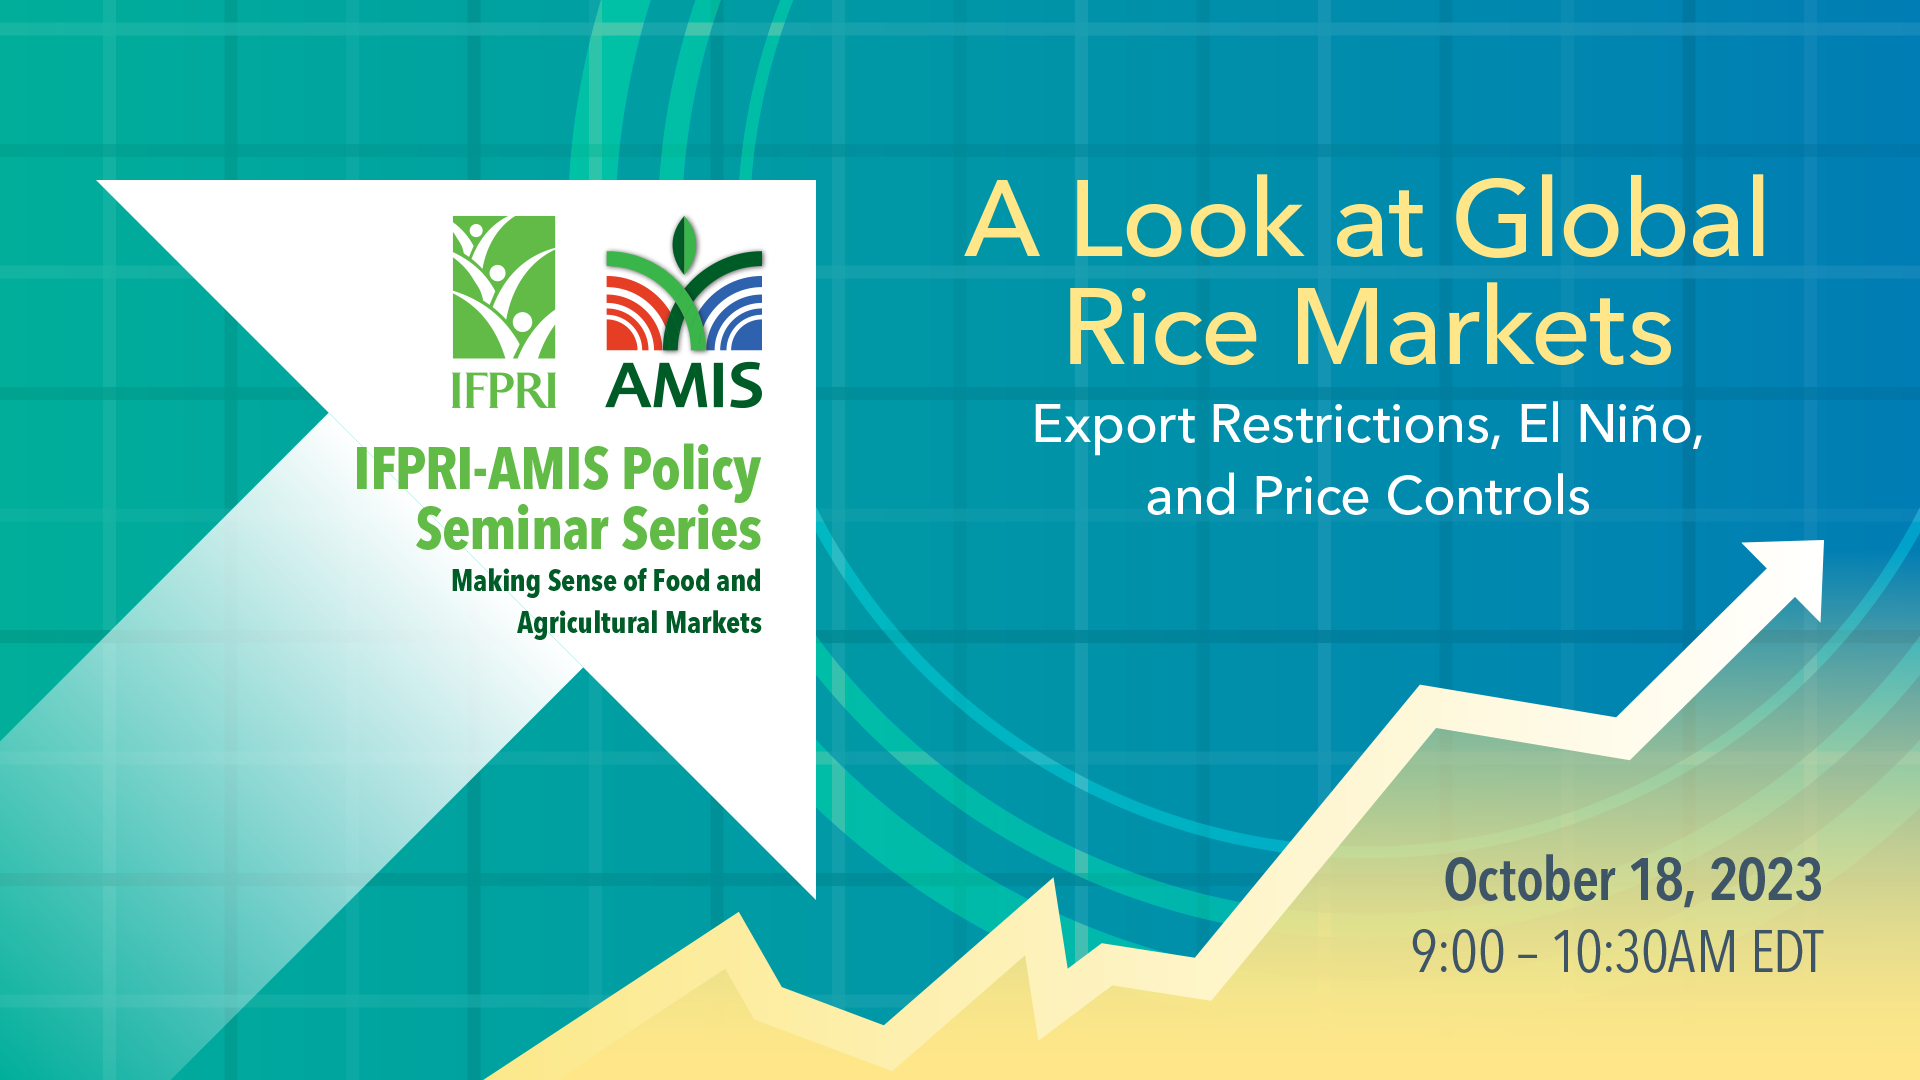 A Look at Global Rice Markets: Export Restrictions, El Niño, and Price Controls